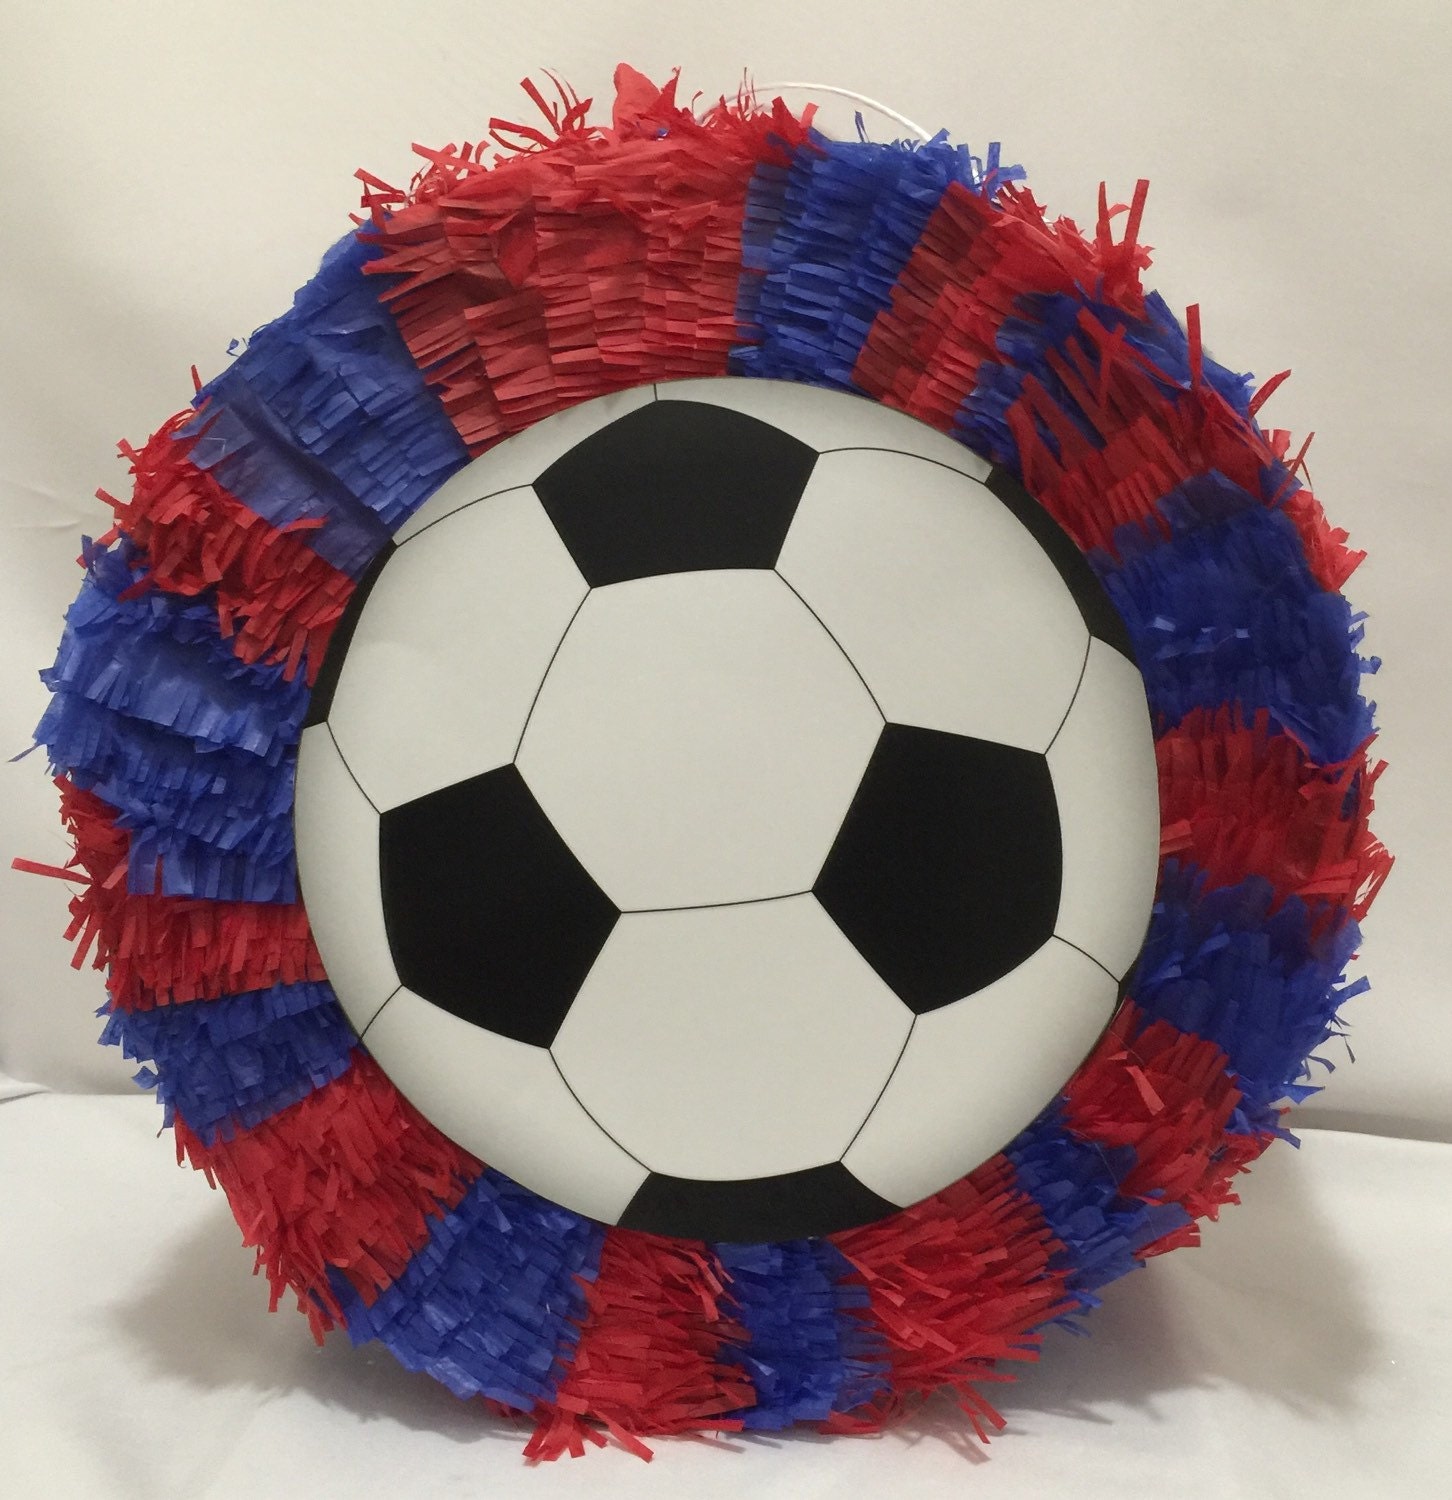 Soccer Ball Pinata Customize Your Own Colors Pull Strings or Whack Style 